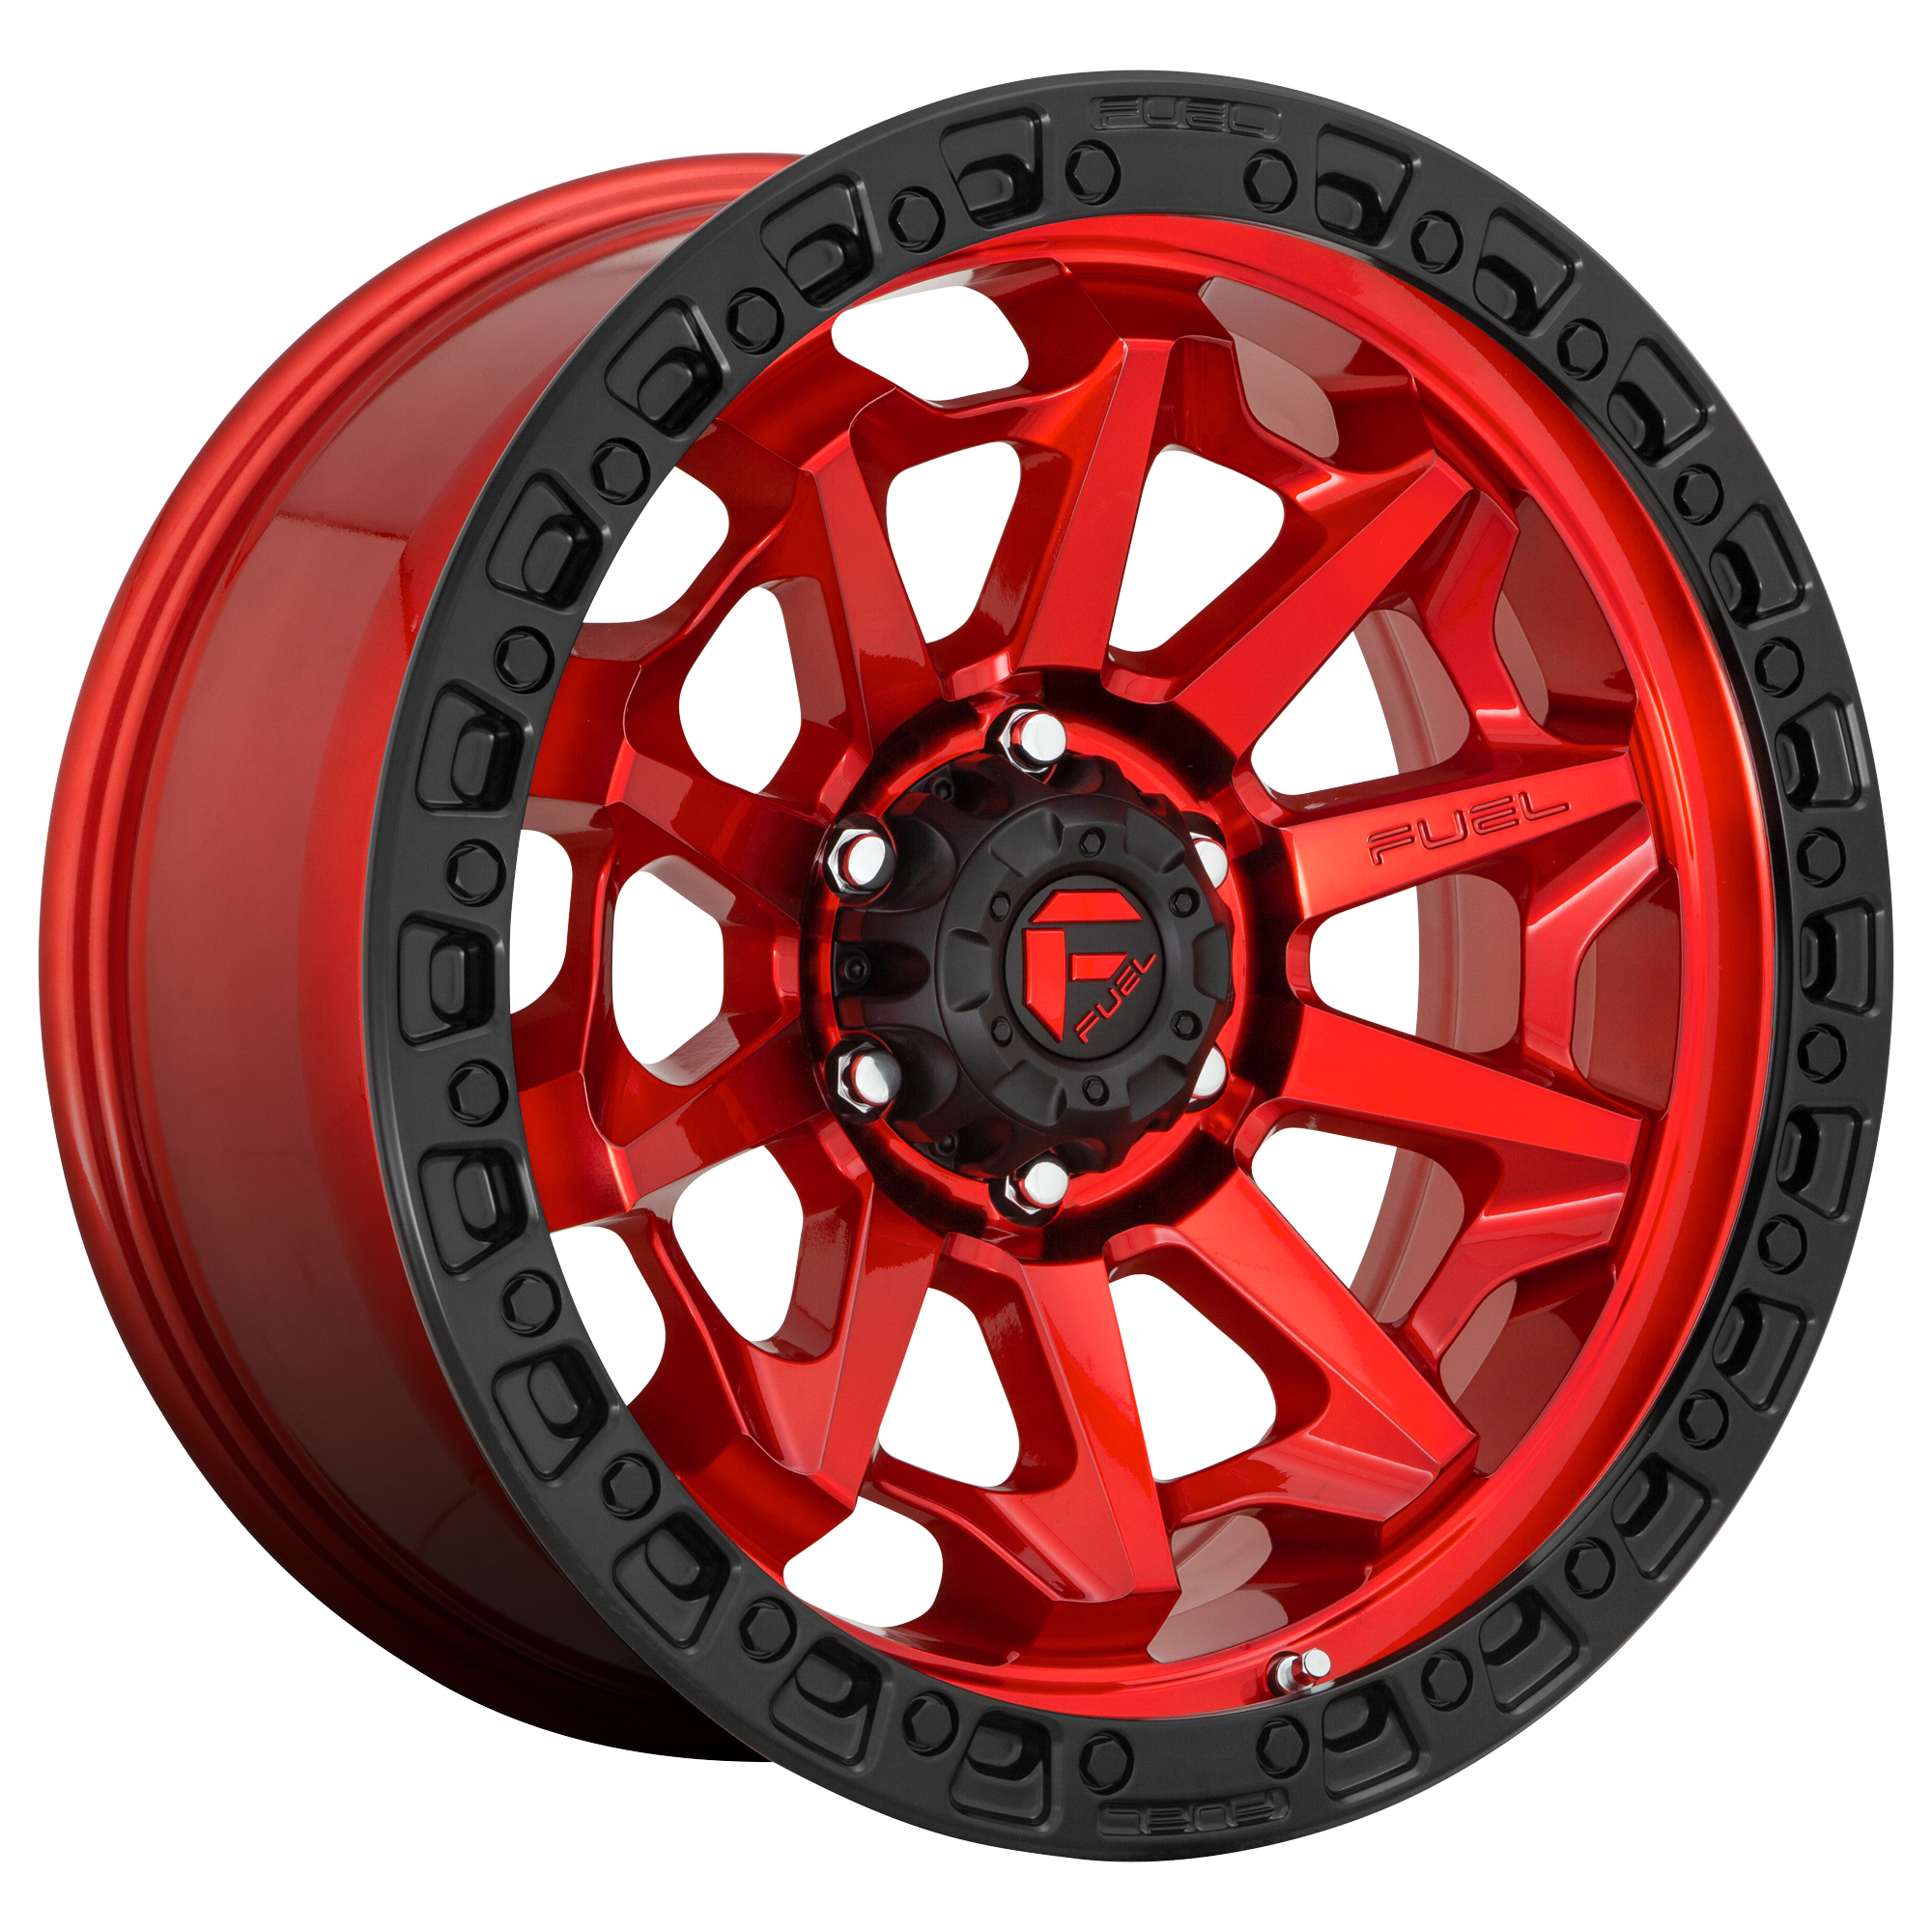 COVERT 17x9 5x127.00 CANDY RED BLACK BEAD RING (1 mm) SPECIAL PRICE - Tires and Engine Performance